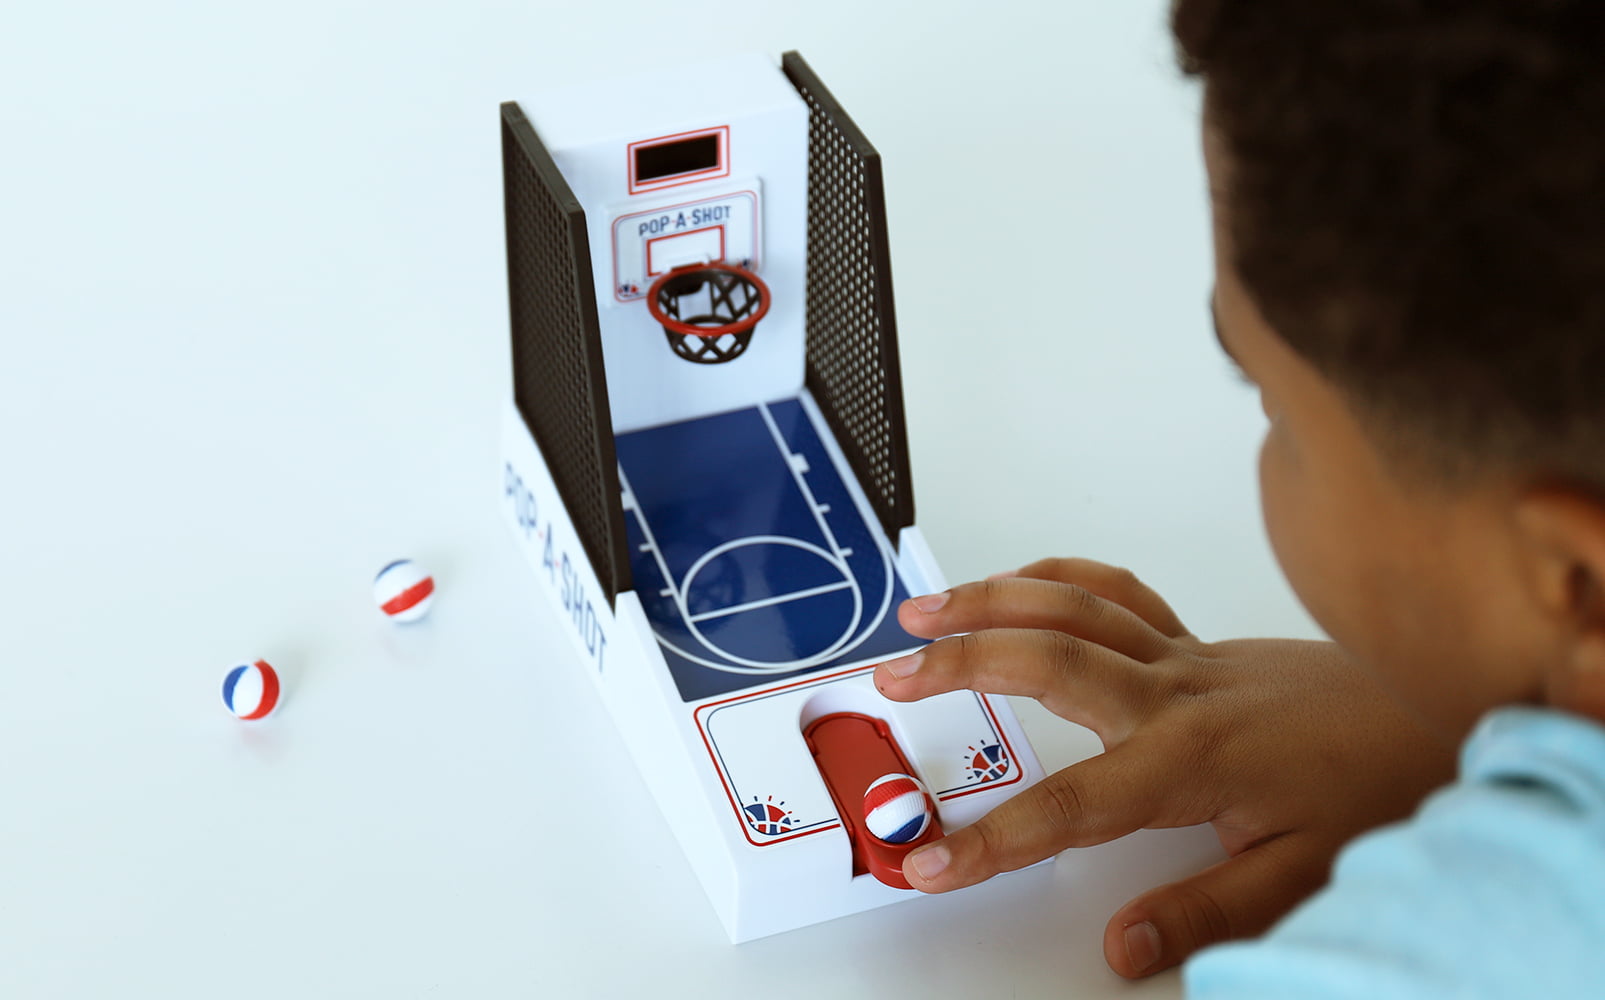 Classic Tabletop Basketball Game Pop-A-Shot Midway Classics 